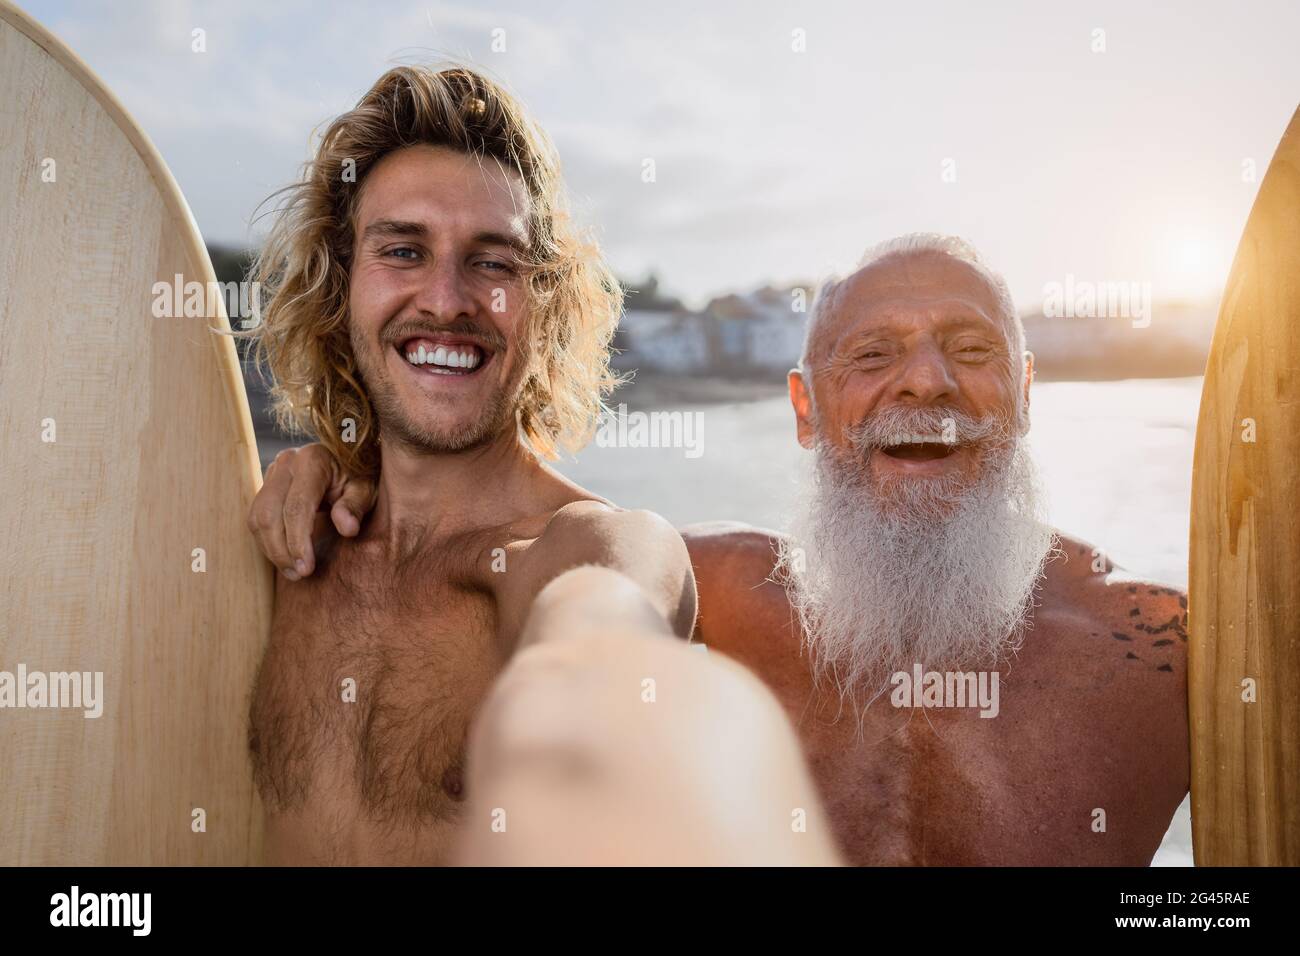 Happy fit surfers taking selfie while having fun surfing together at sunset time - Extreme sport lifestyle and friendship concept Stock Photo